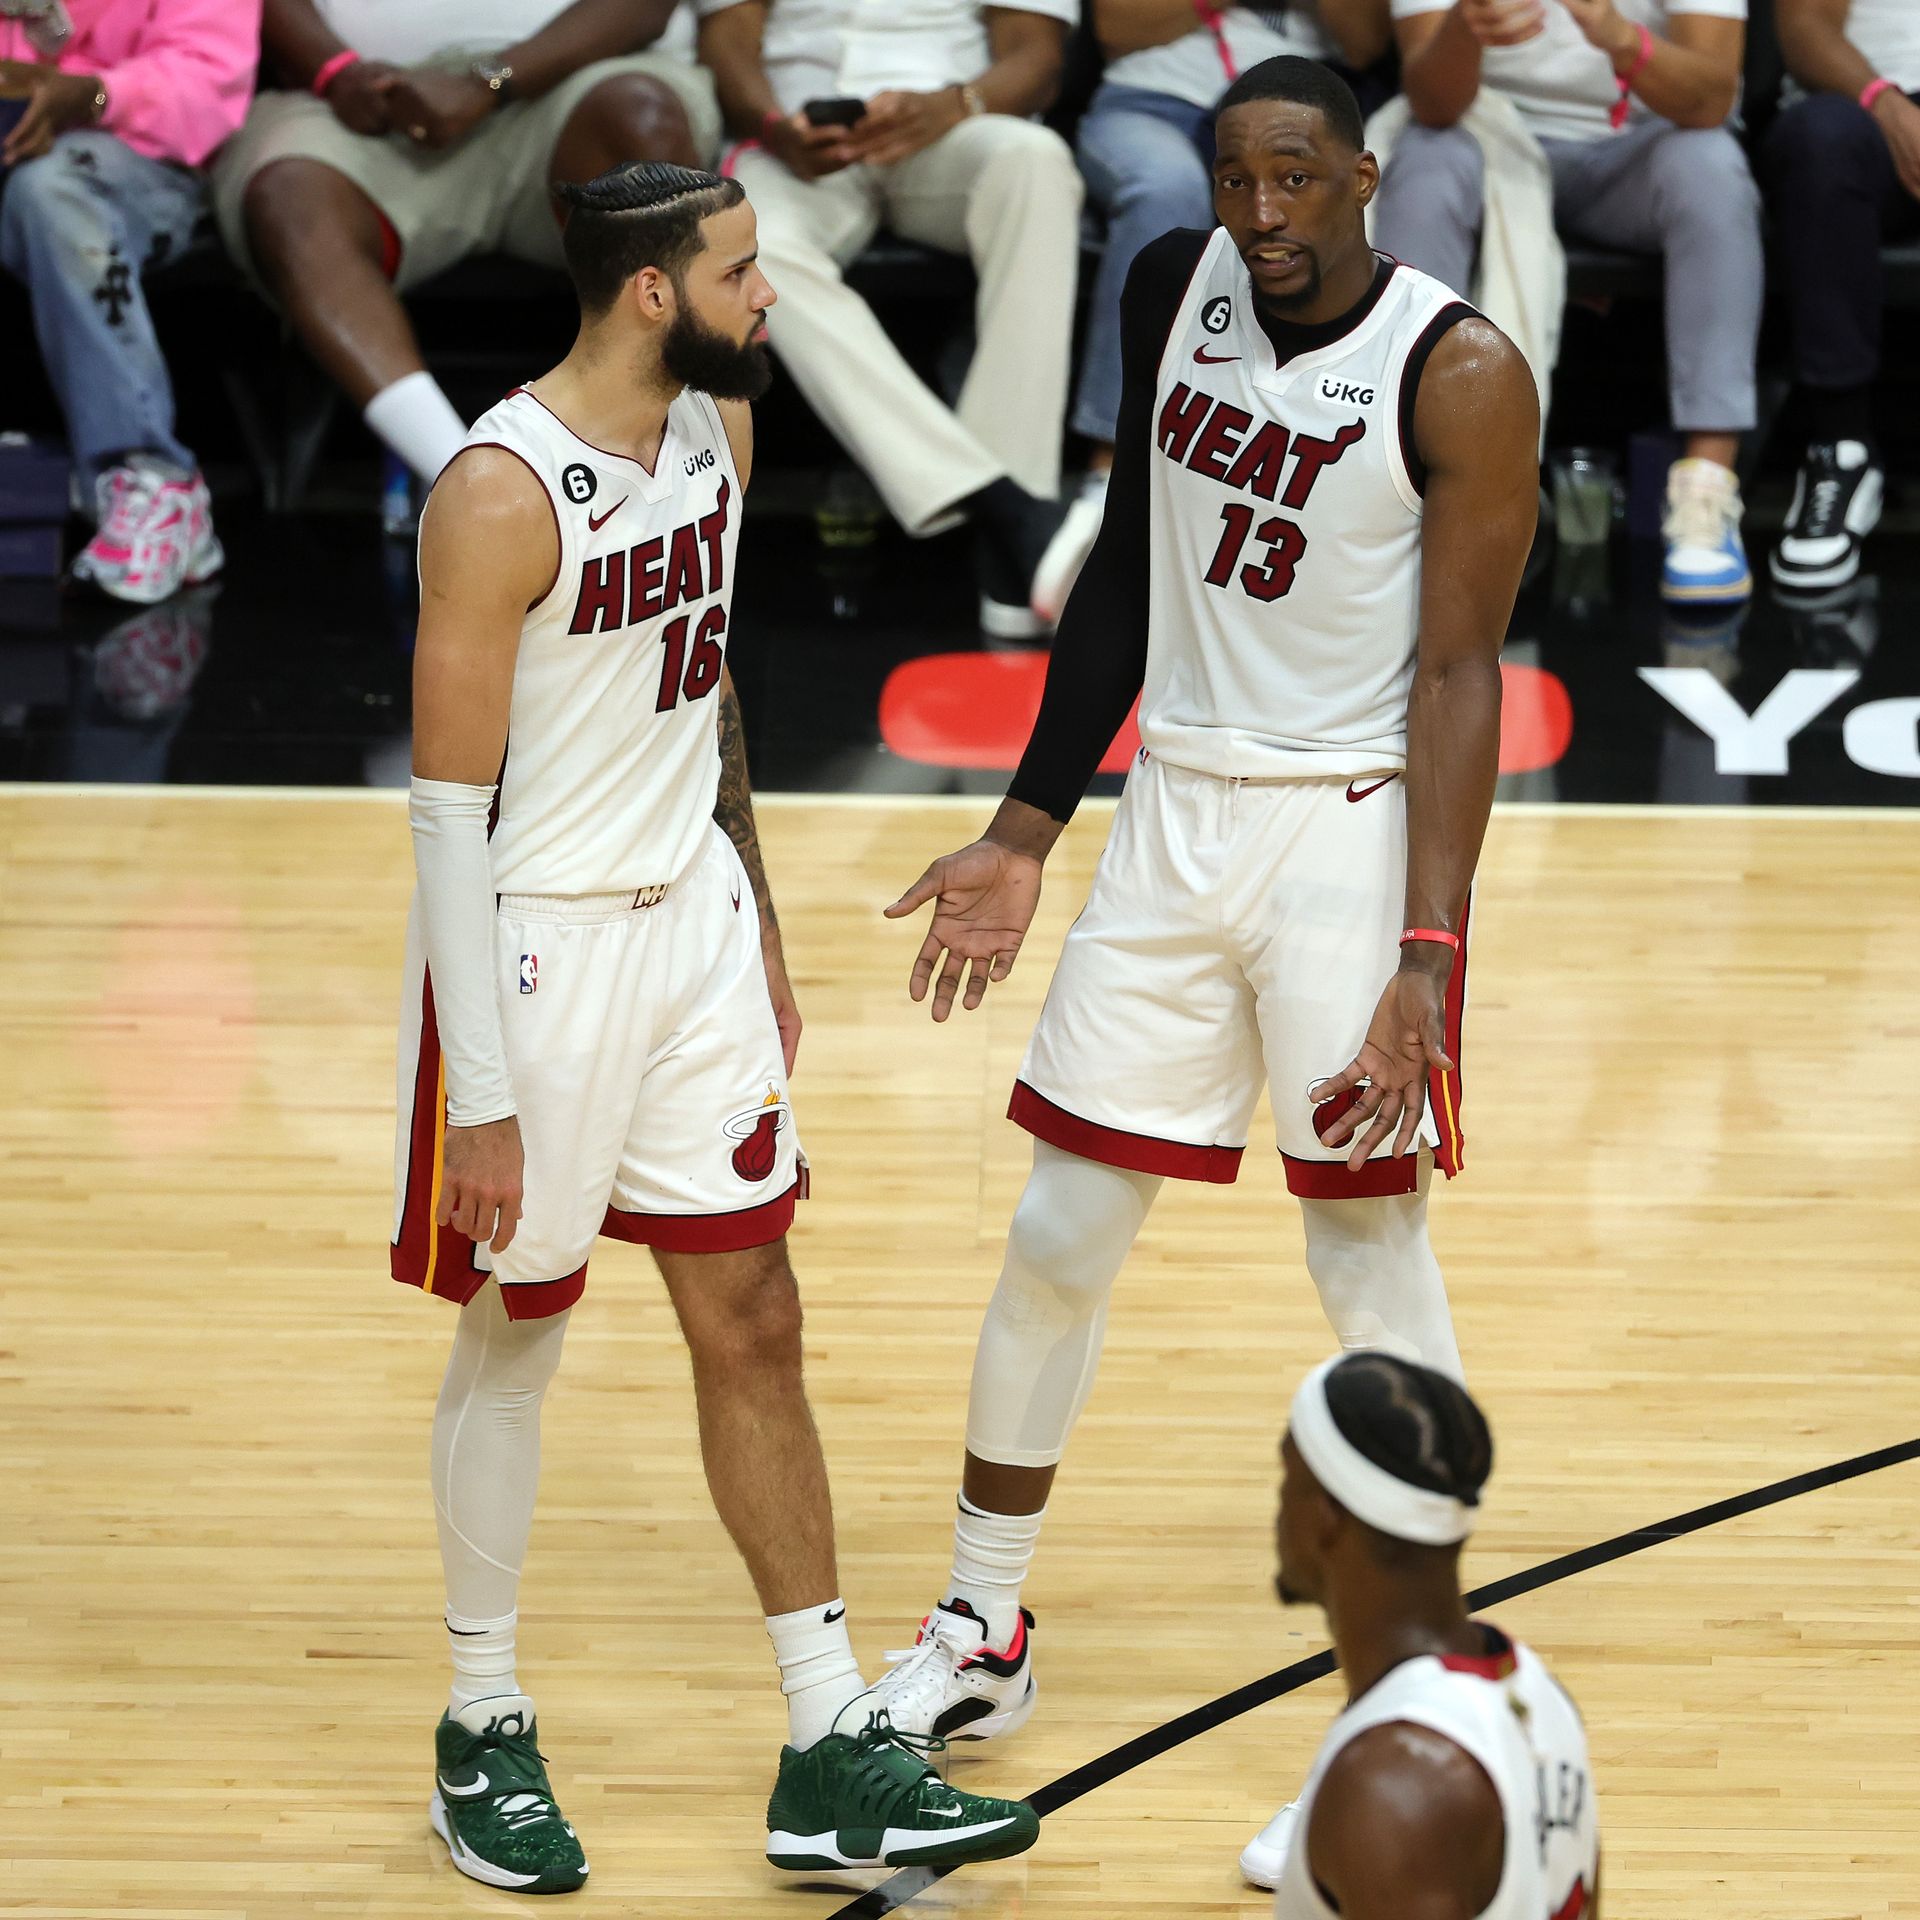 Game 3 awaits in the NBA Finals, with Heat loose and Nuggets facing  adversity